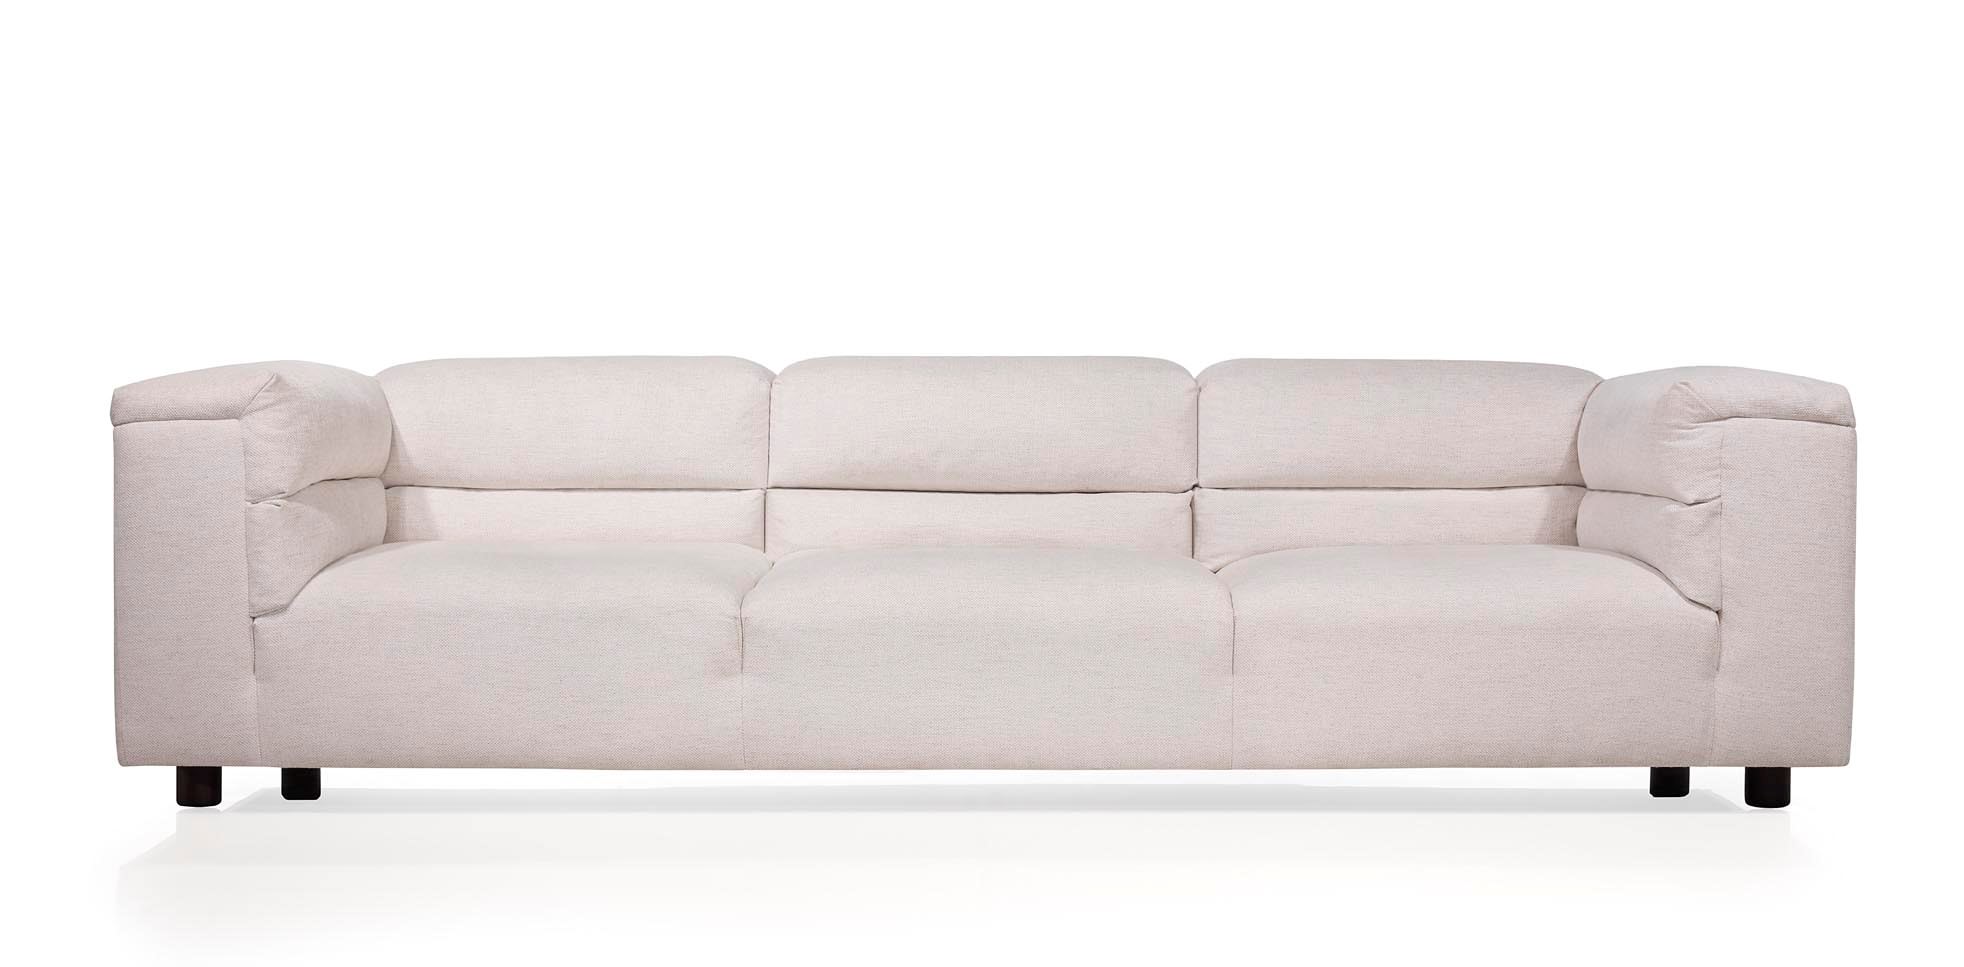 Cypress sumptuous oversized cushioning sits lightly on its wood feet. Made to order fully upholstered and available in a range of fabric options. Bespoke furniture options (...)